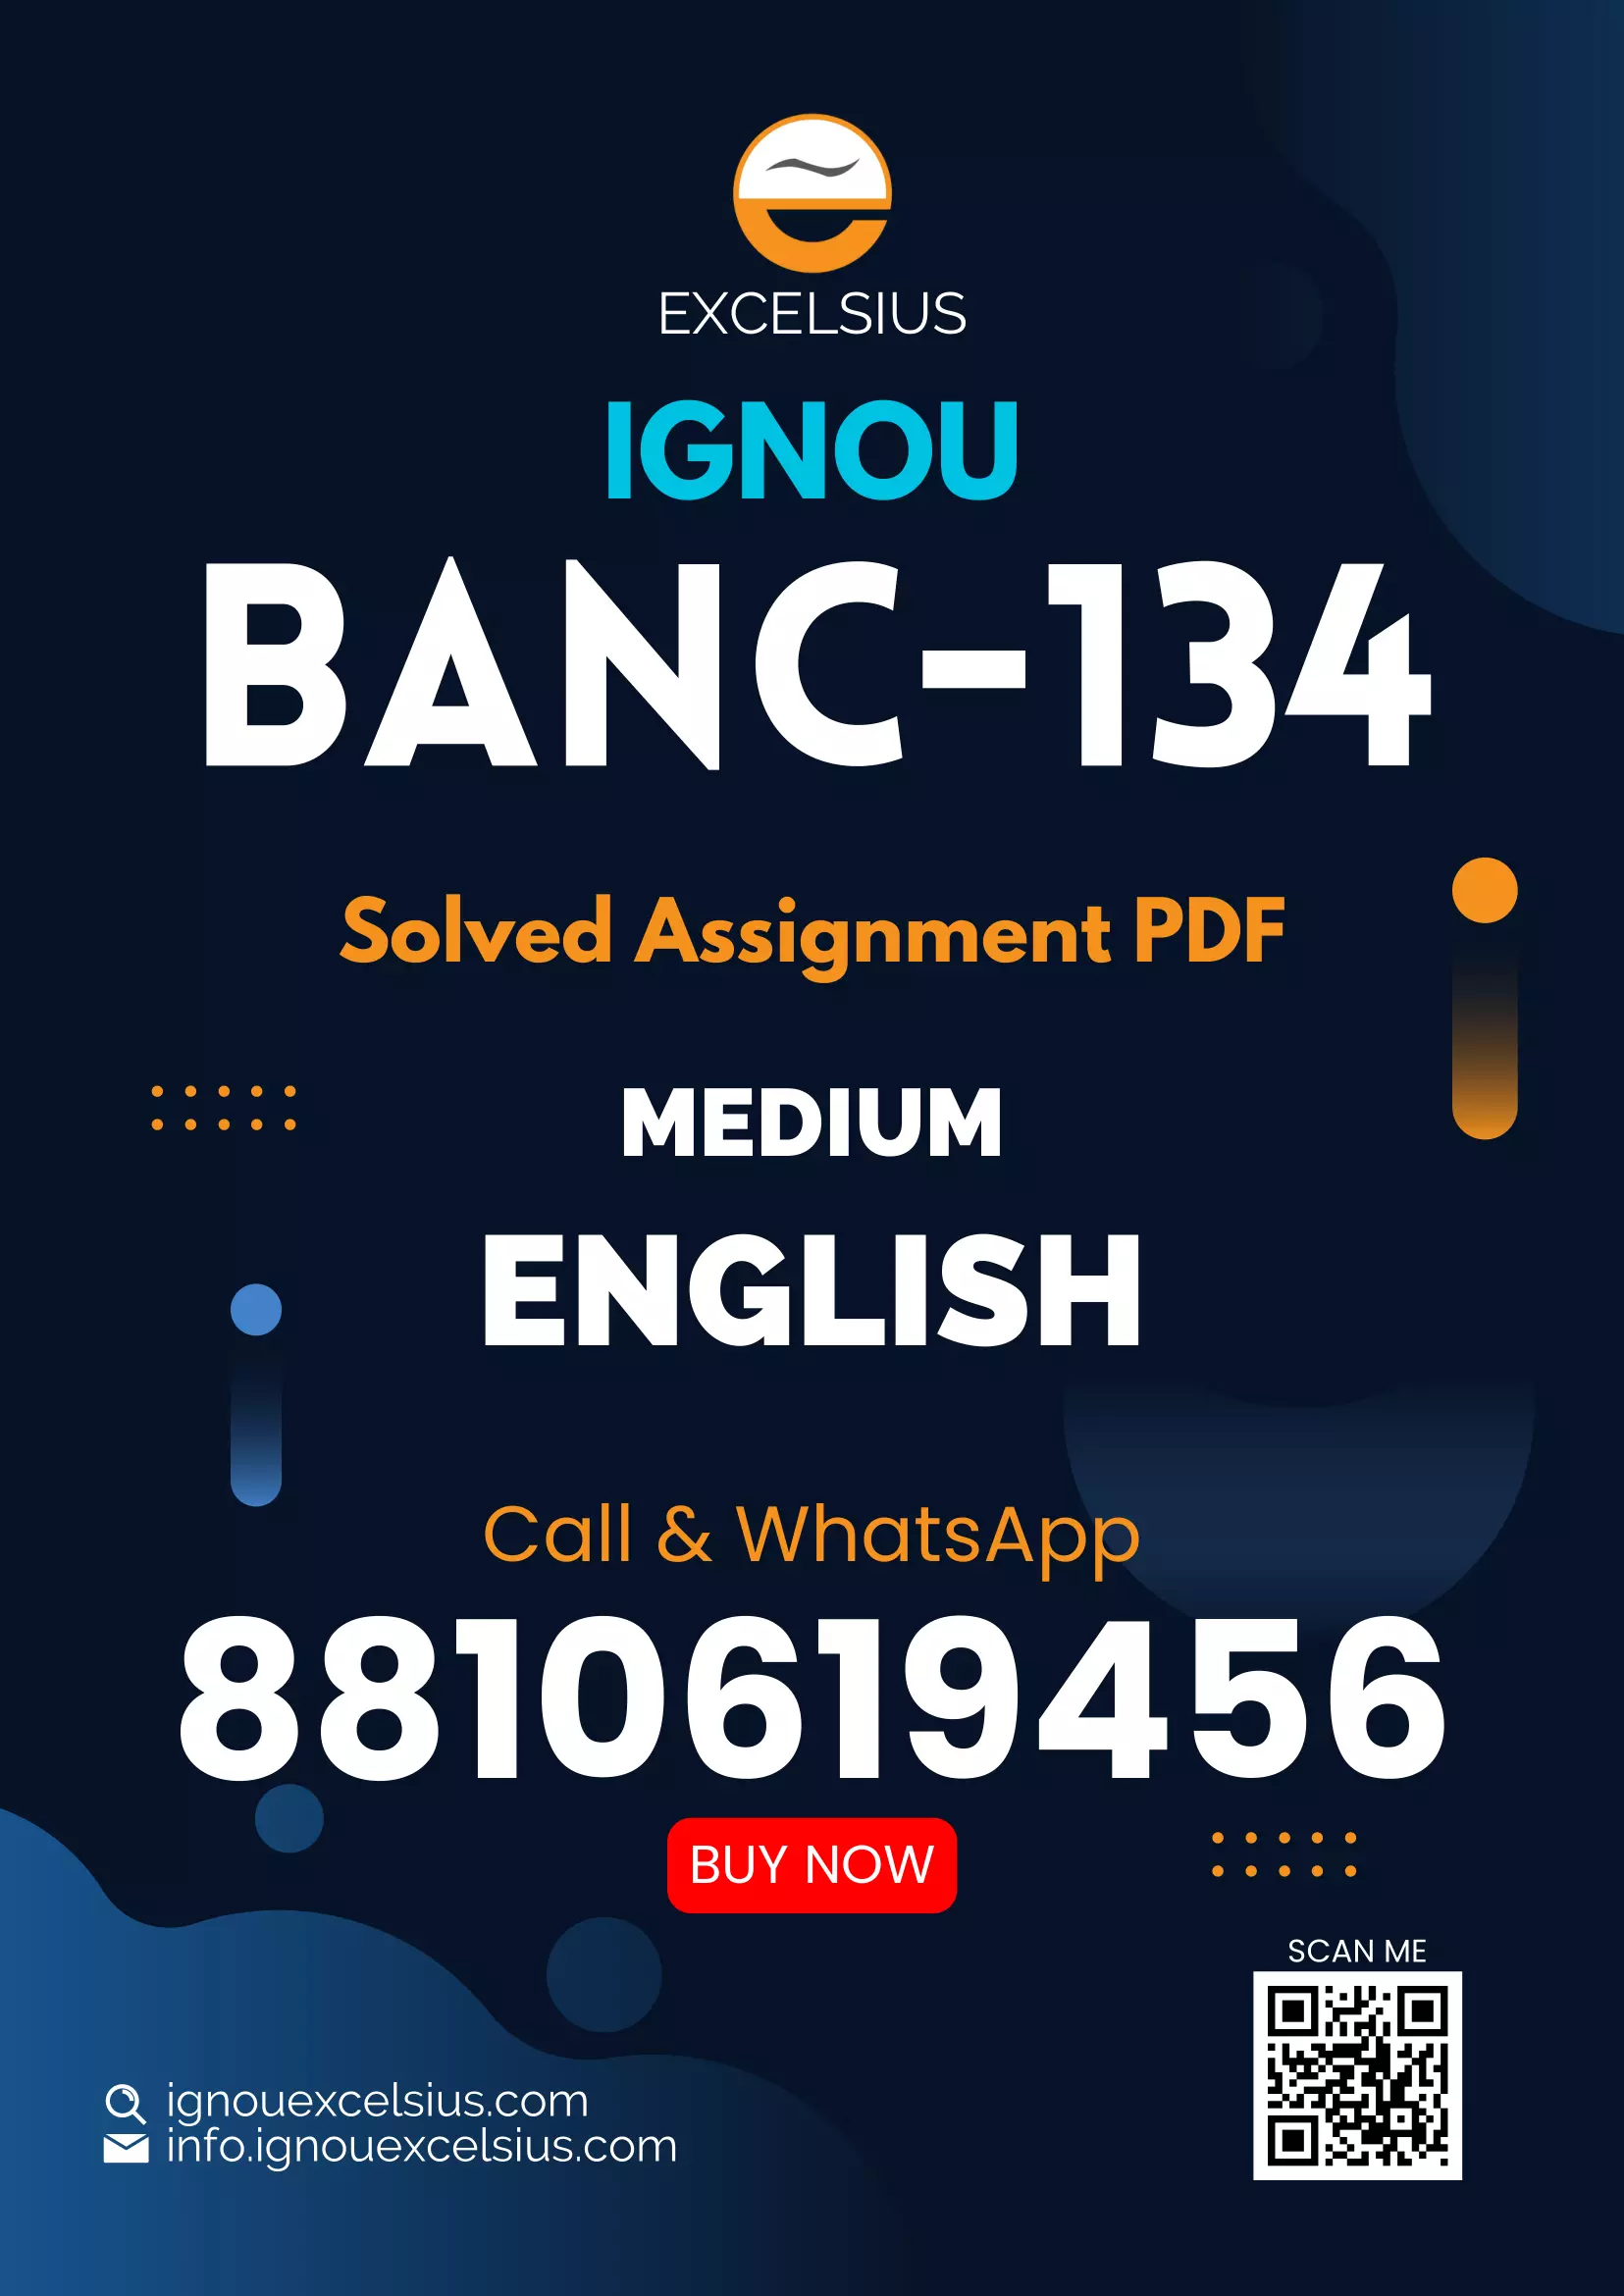 IGNOU BANC-134 - Fundamentals of Archaeological Anthropology, Latest Solved Assignment-July 2022 – January 2023